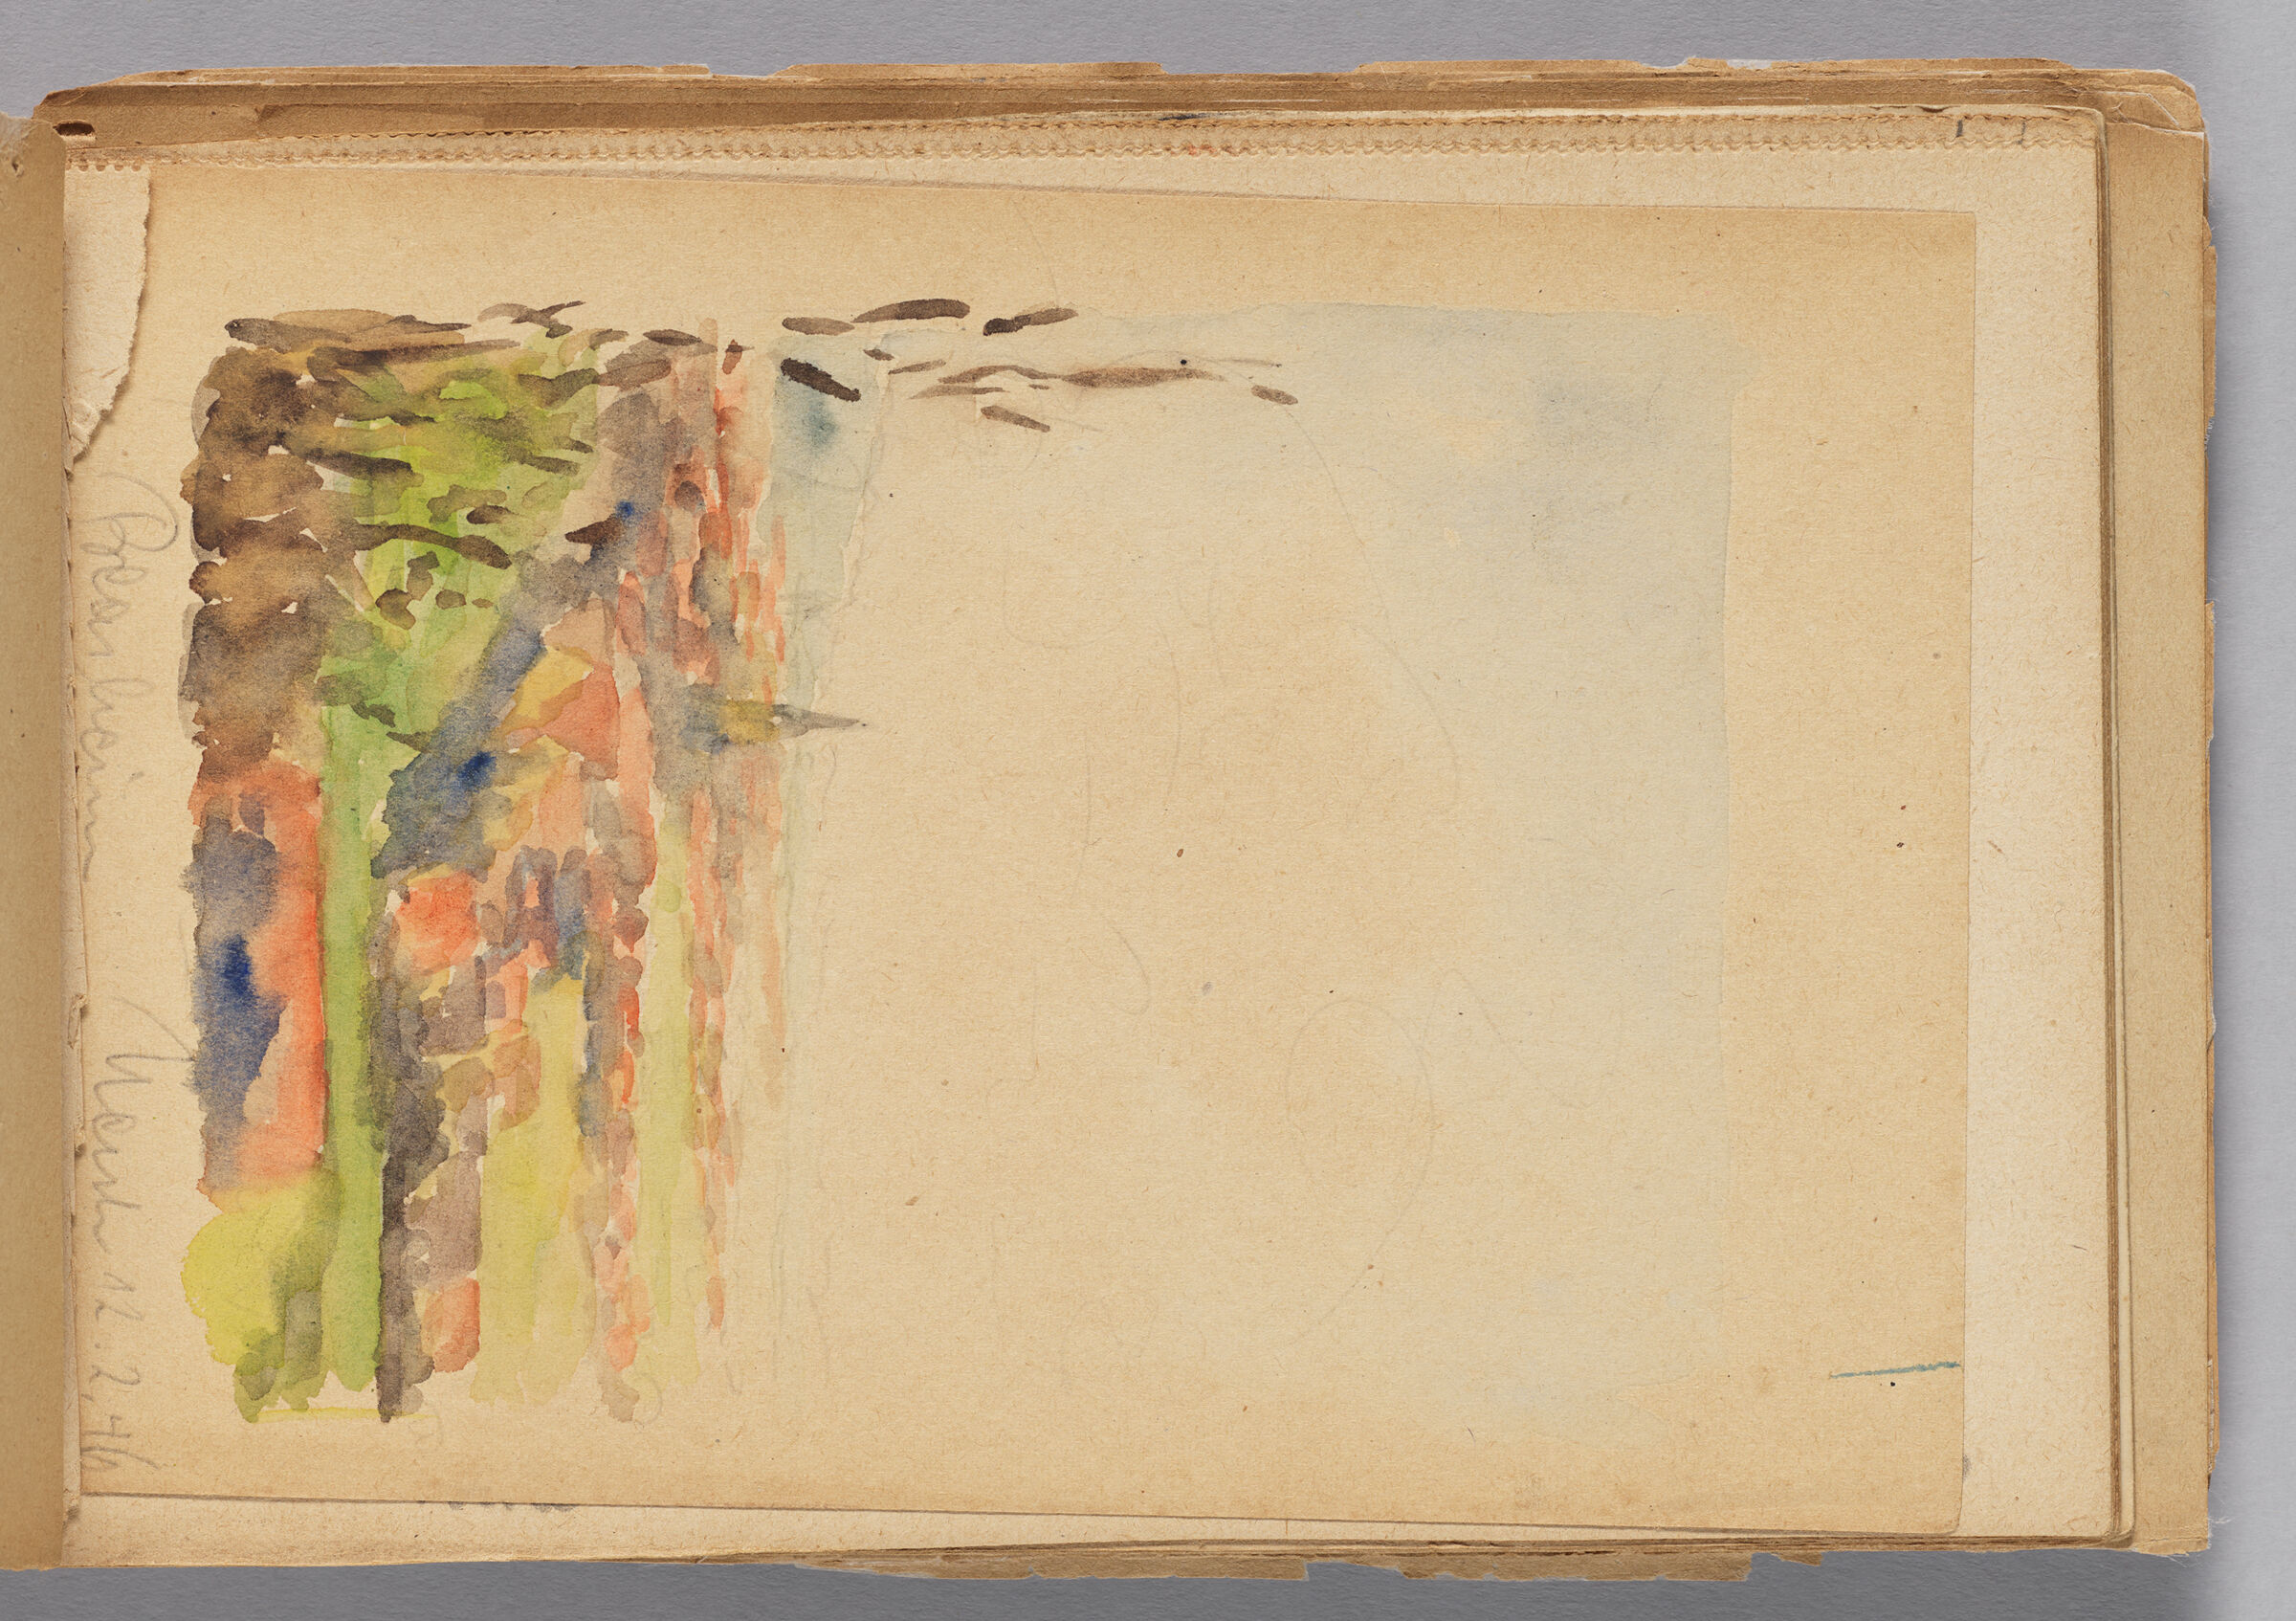 Untitled (Blank, Left Page); Untitled (Blasheim Landscape, Right Page)